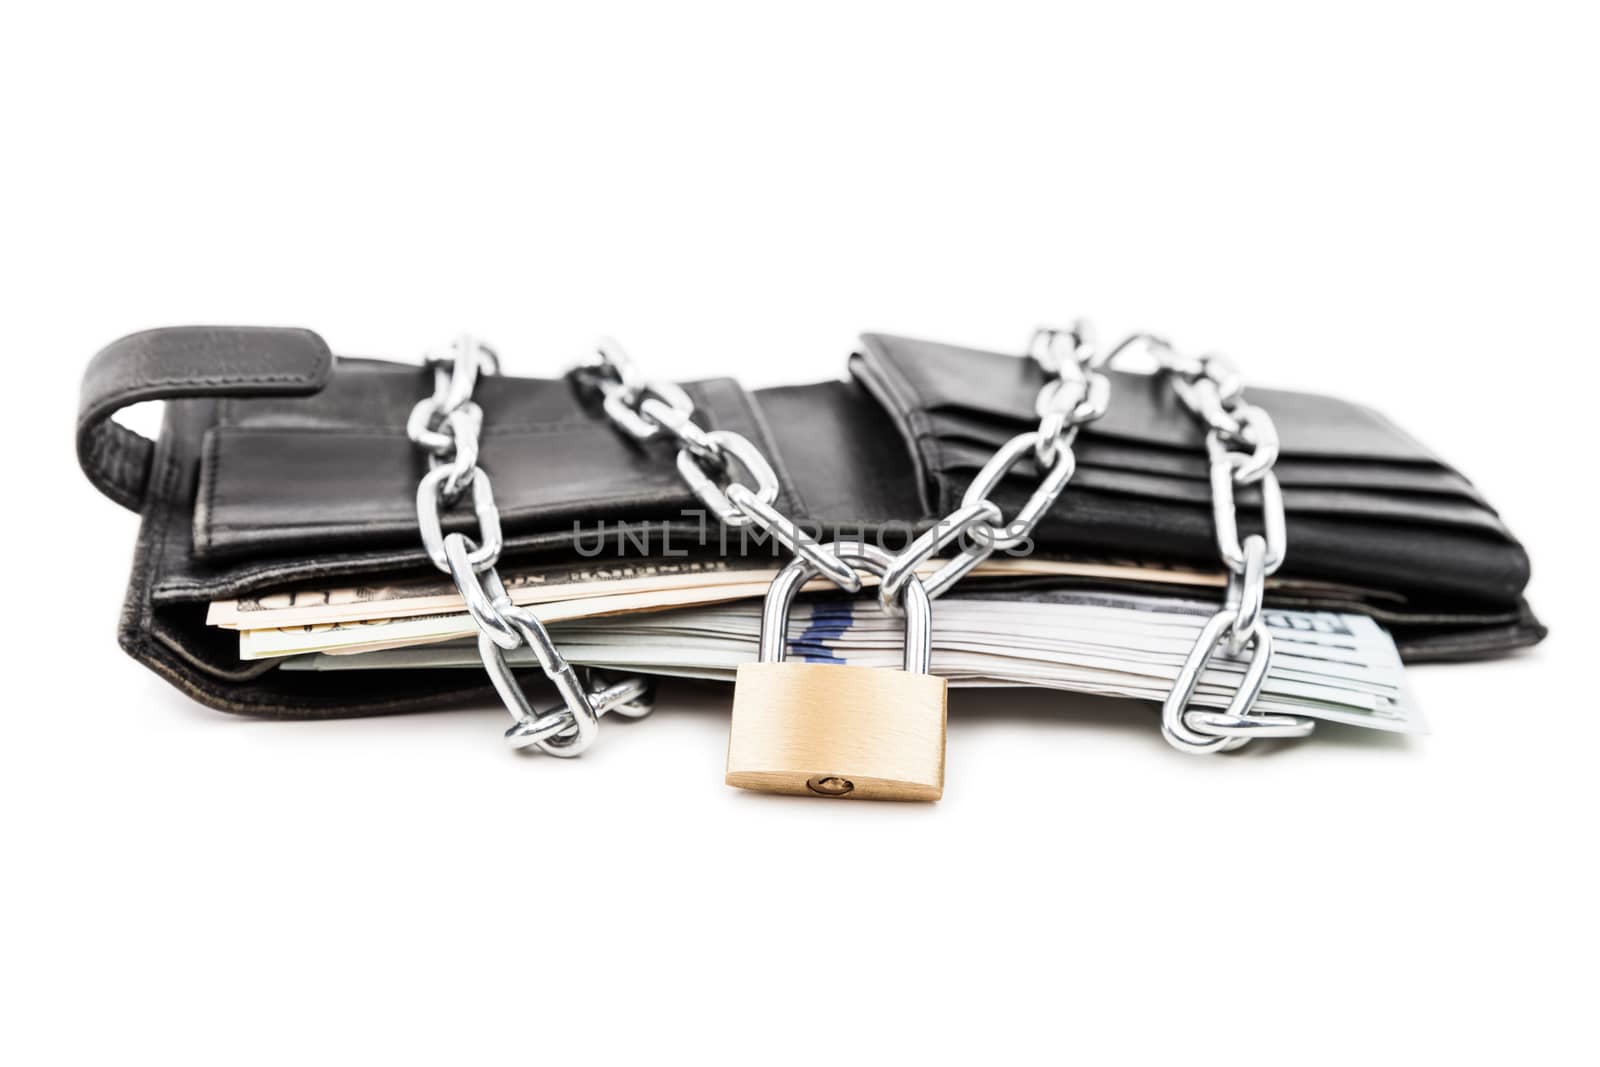 Business safety and finance protection concept - metal chain link with locked padlock on leather wallet full of dollar currency money white isolated